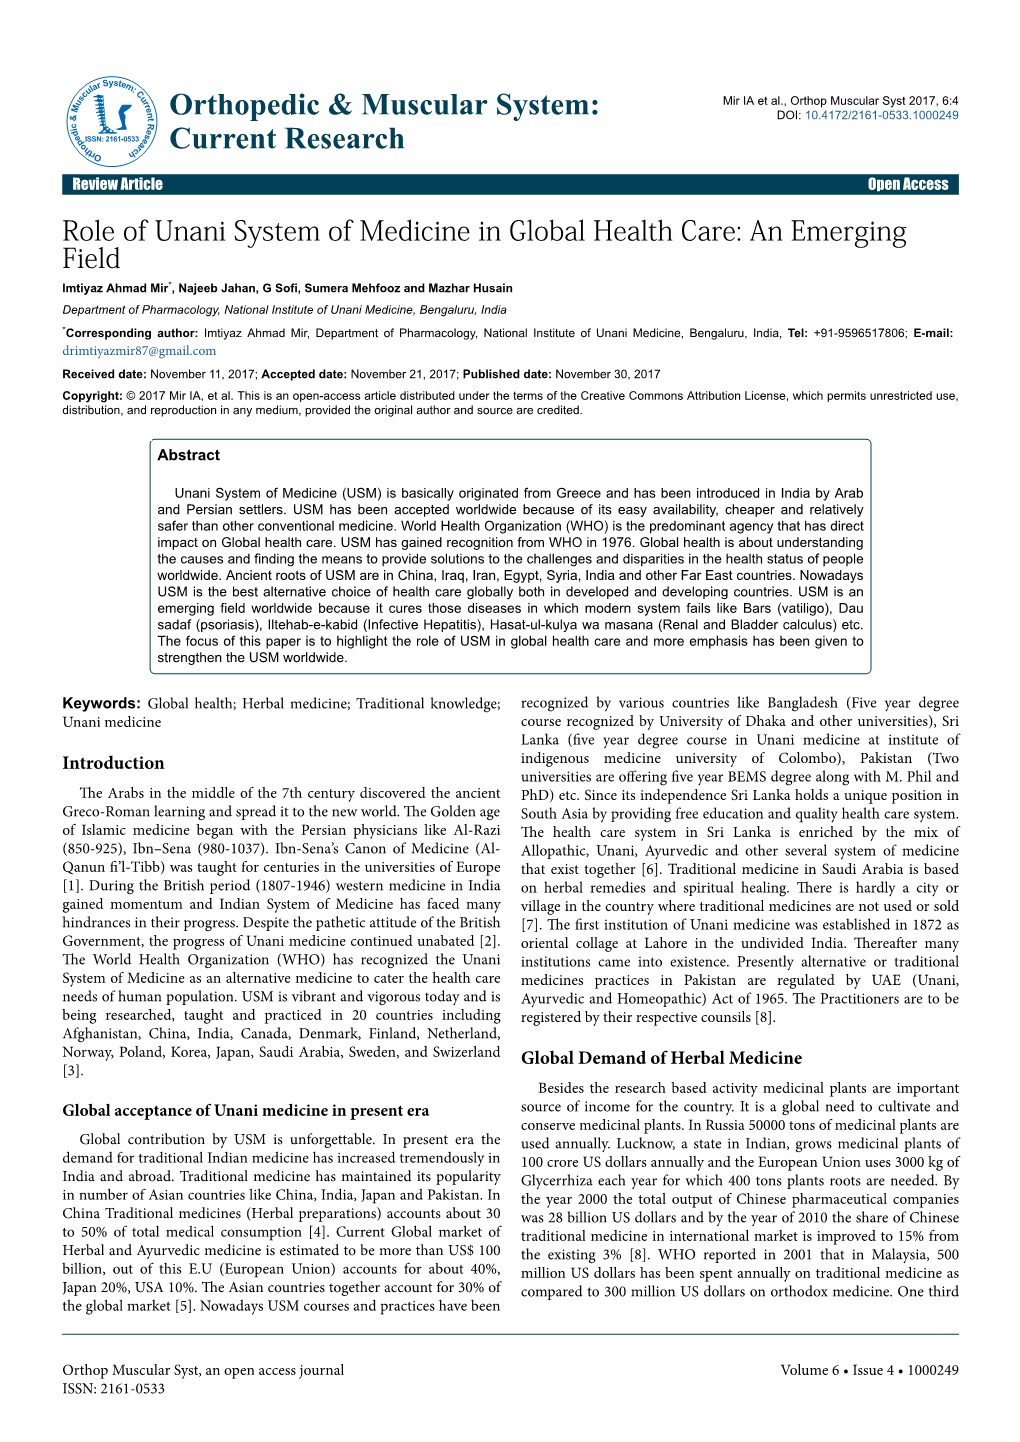 Role of Unani System of Medicine in Global